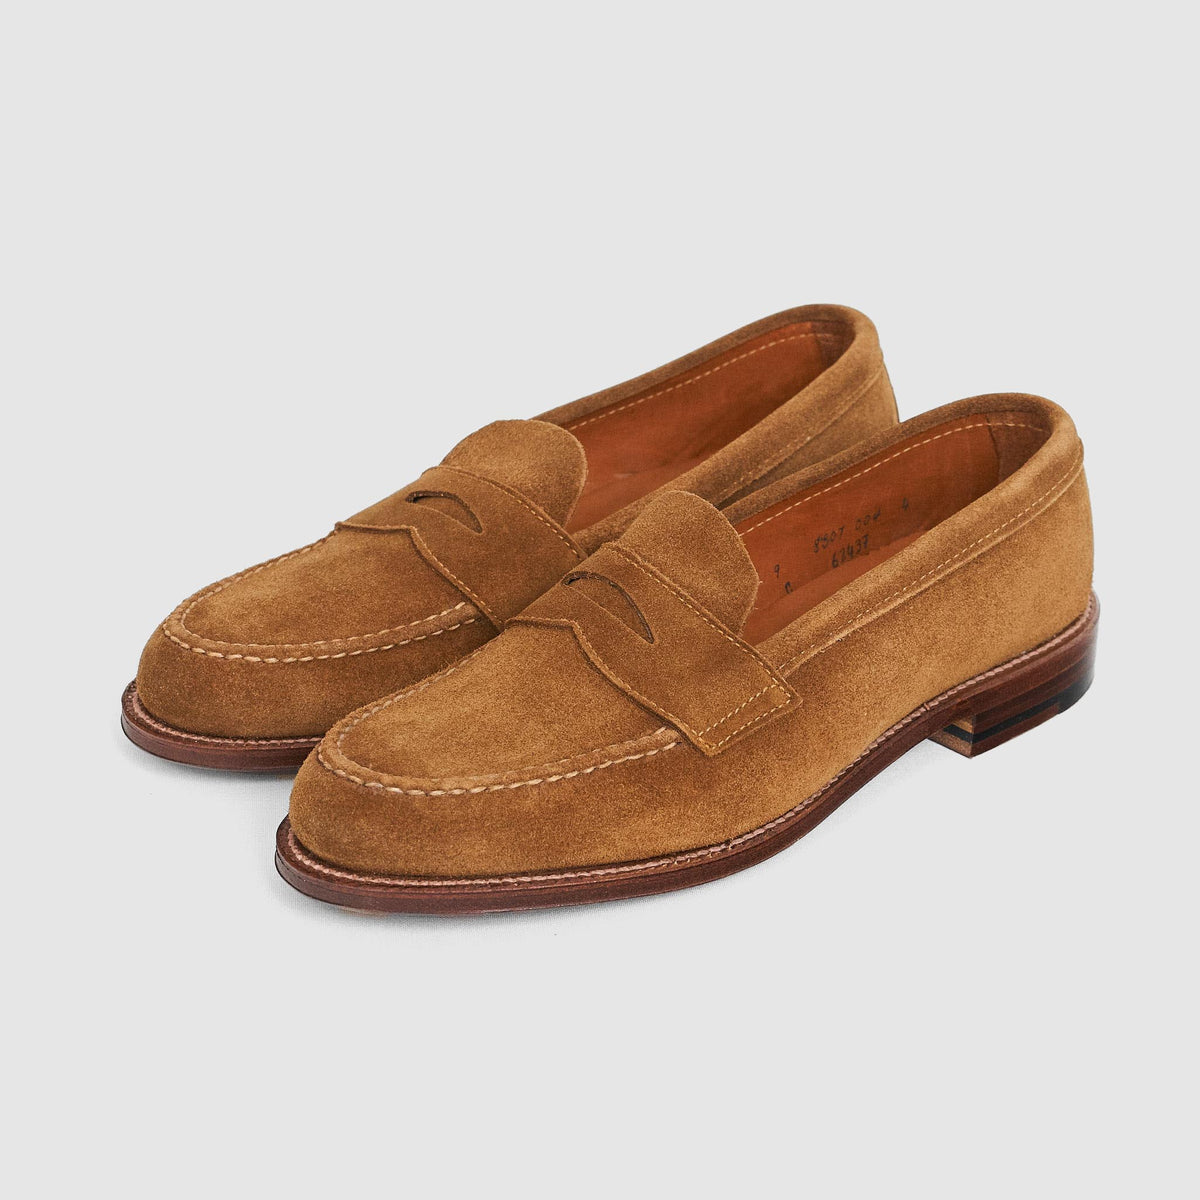 Alden Penny Loafers Snuff Suede 6243F